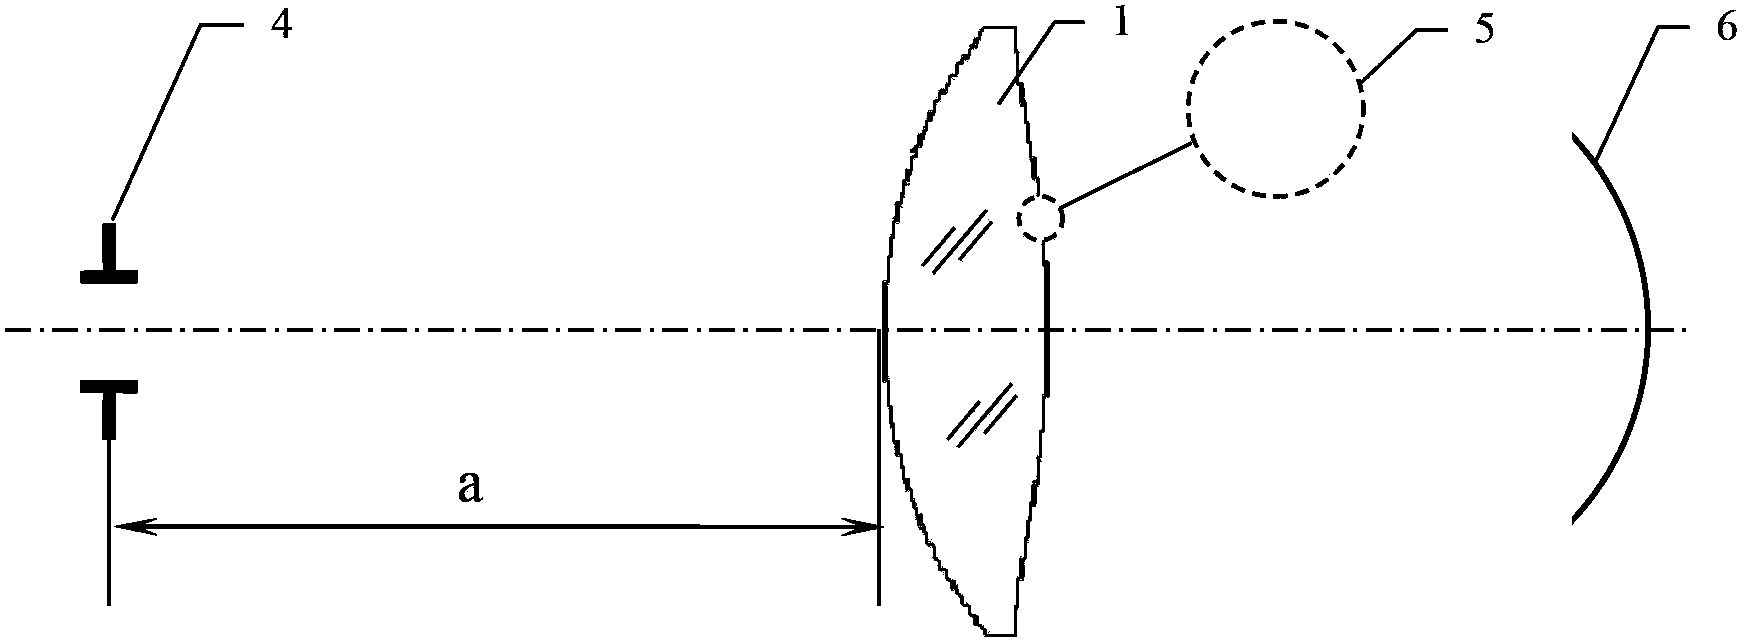 Diffractive-refractive mixed type eyepiece used for curvature image plane with long exit pupil distance